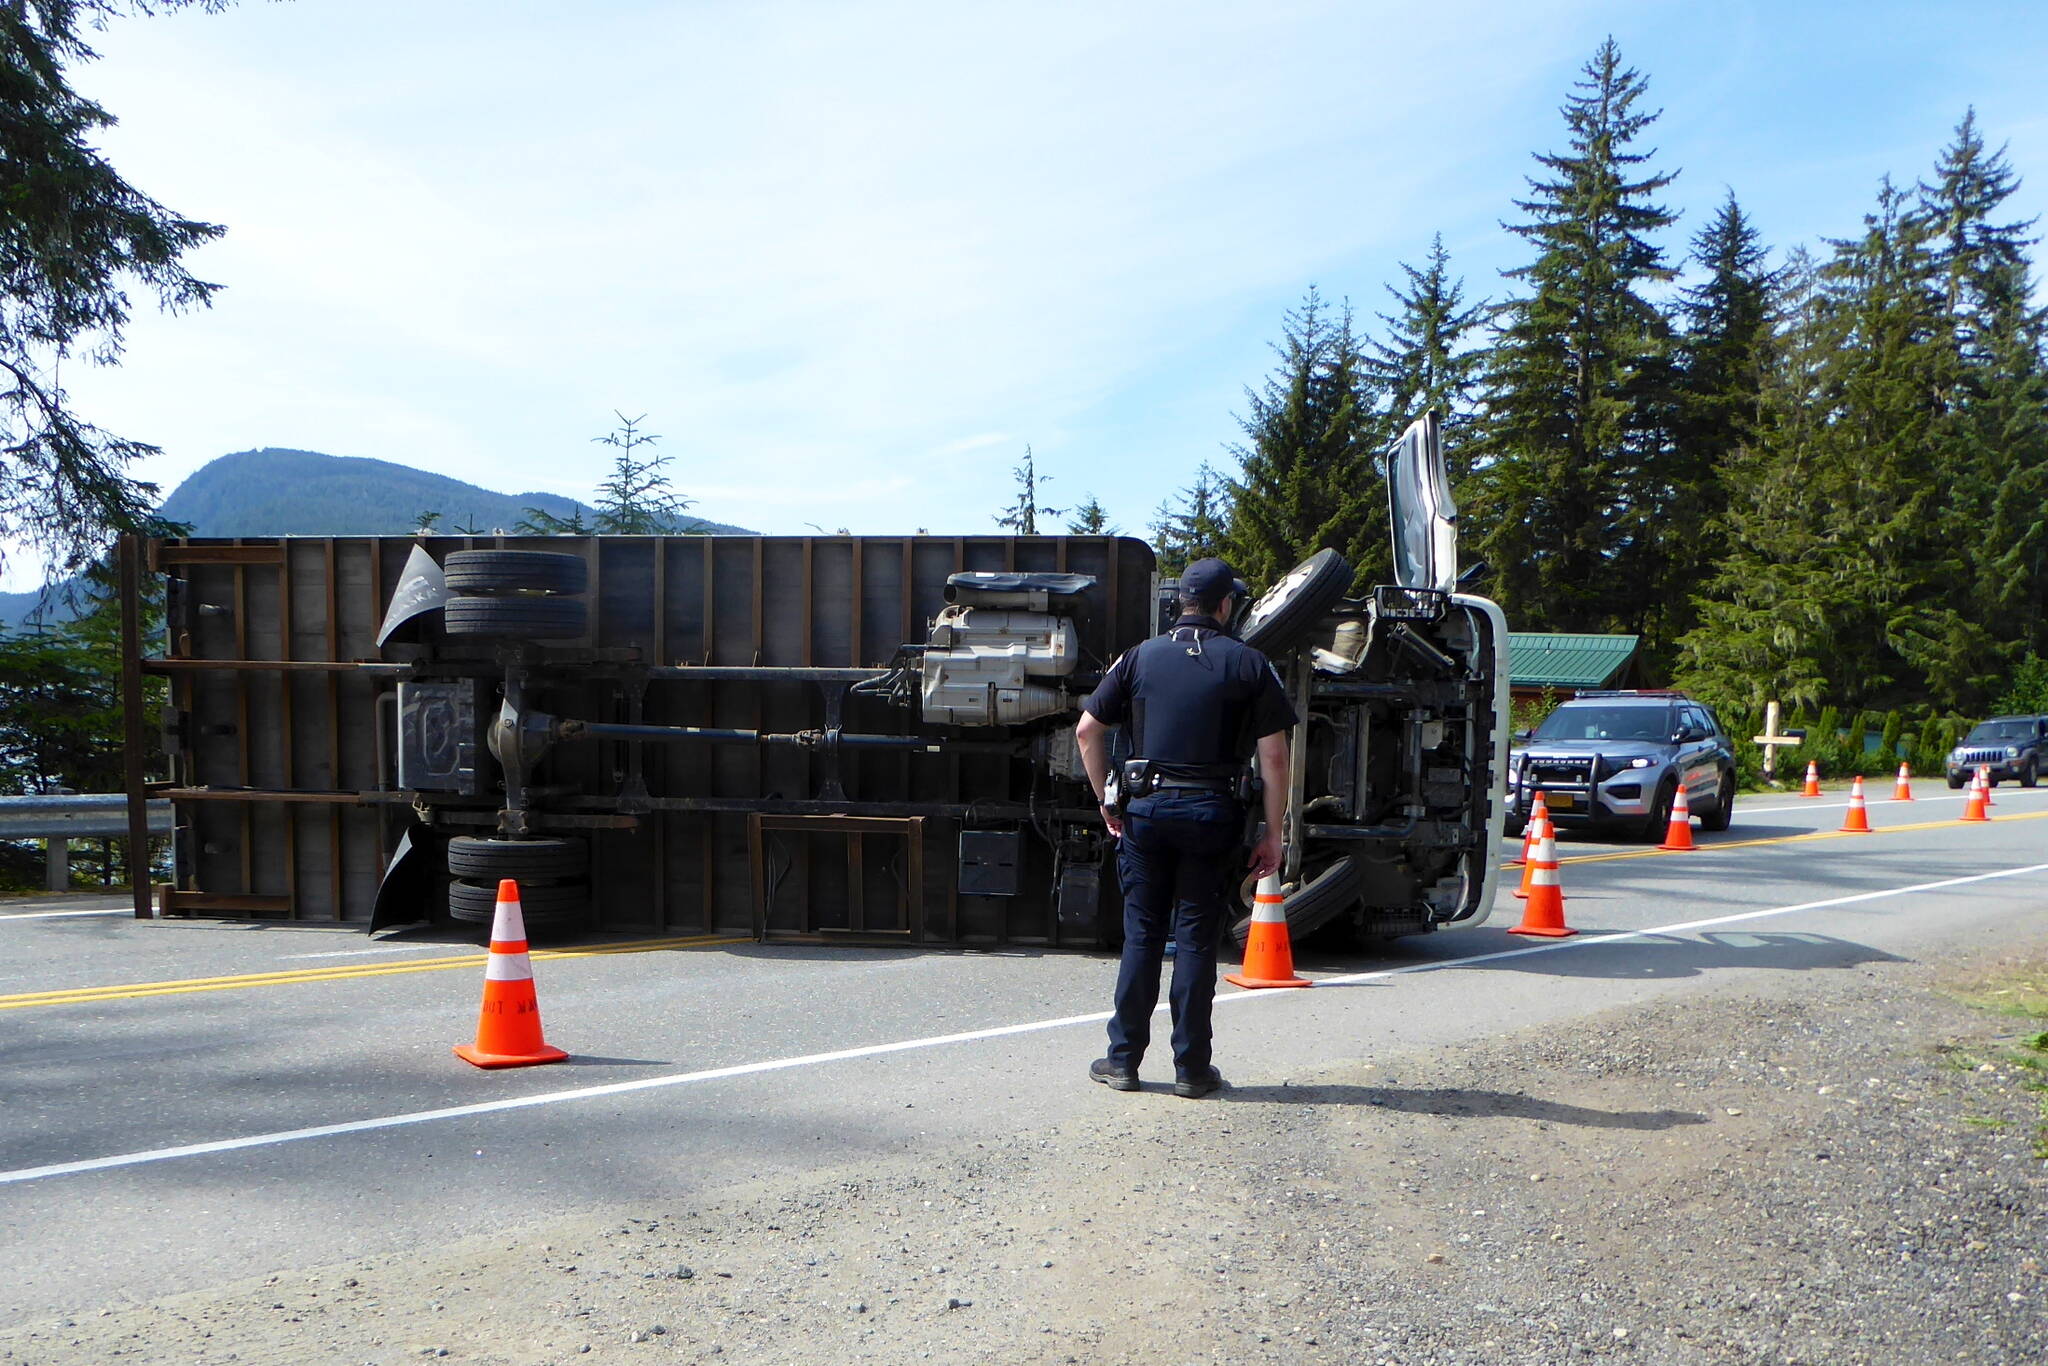 A moving truck that overturned blocks Fritz Cove Road in both directions Thursday. Nobody was injured by the accident, but traffic is being diverted to Engineers Cutoff Road, according to the Juneau Police Department. (Photo by Judy Hutchison)